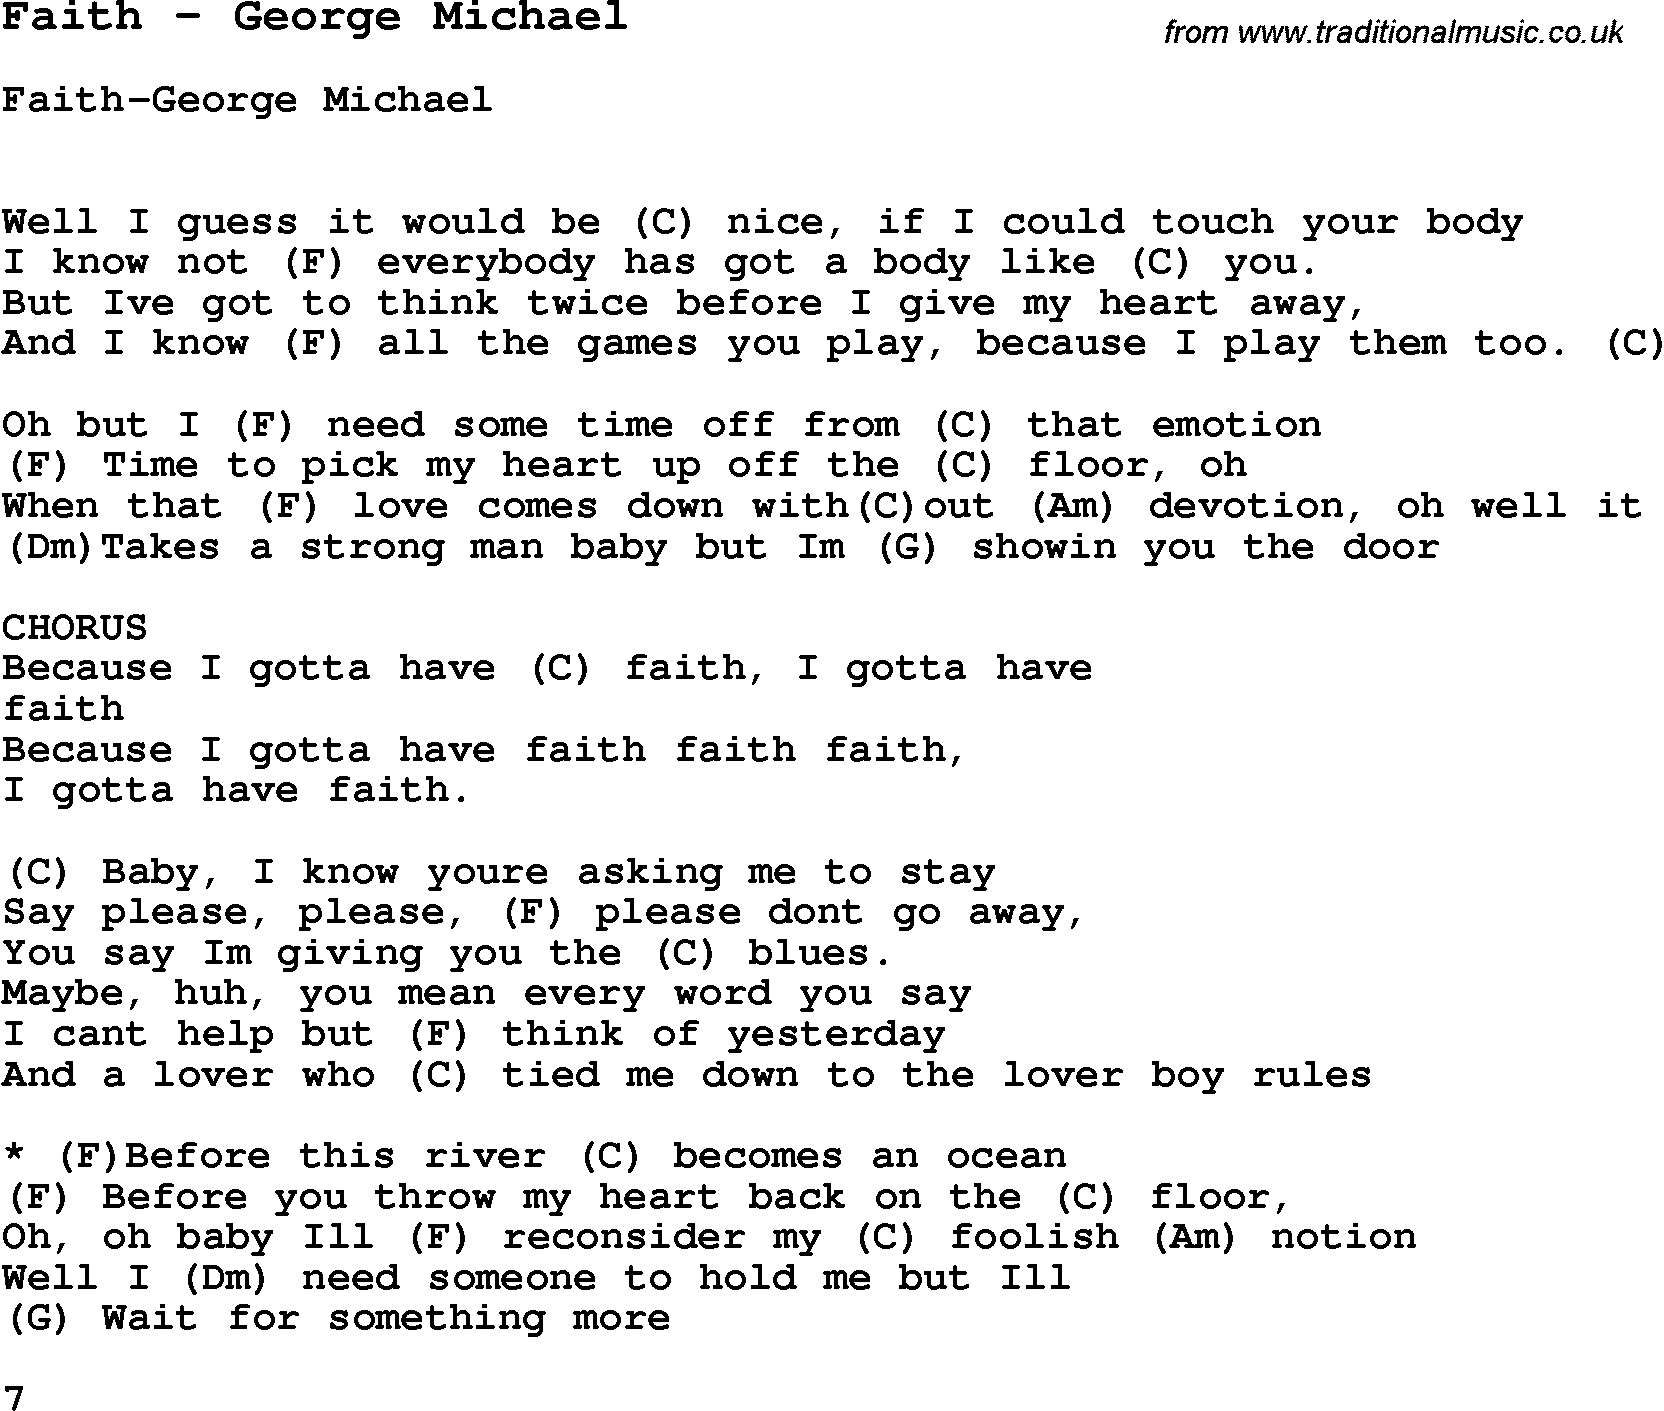 Song Faith by George Michael, with lyrics for vocal performance and accompaniment chords for Ukulele, Guitar Banjo etc.